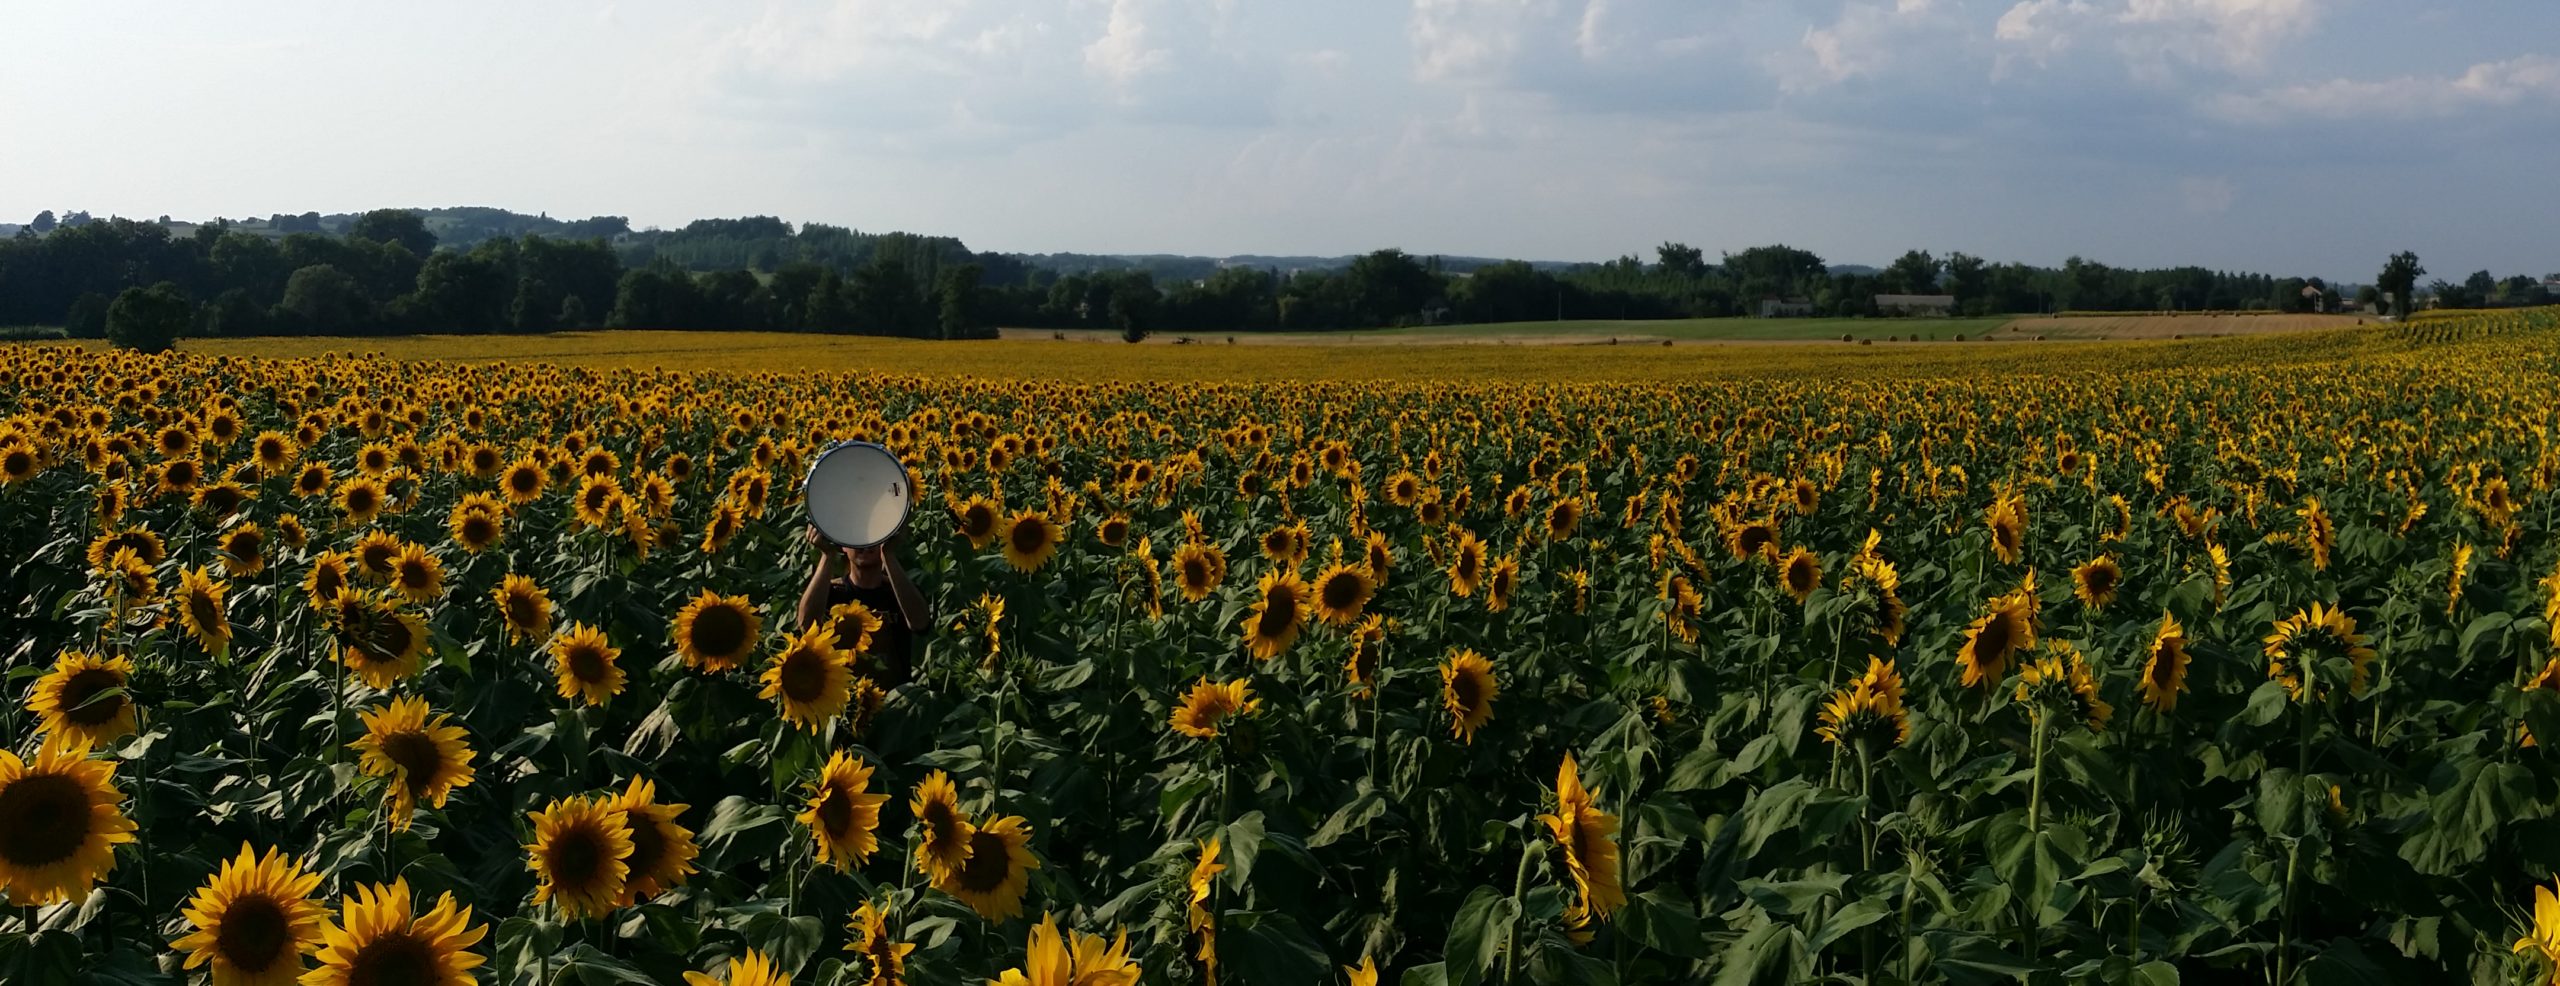 Michael Gould holding a drum above his head standing in a giant field of sunflowers. Gould is almost invisible because the flowers are so tall and the field is so large.